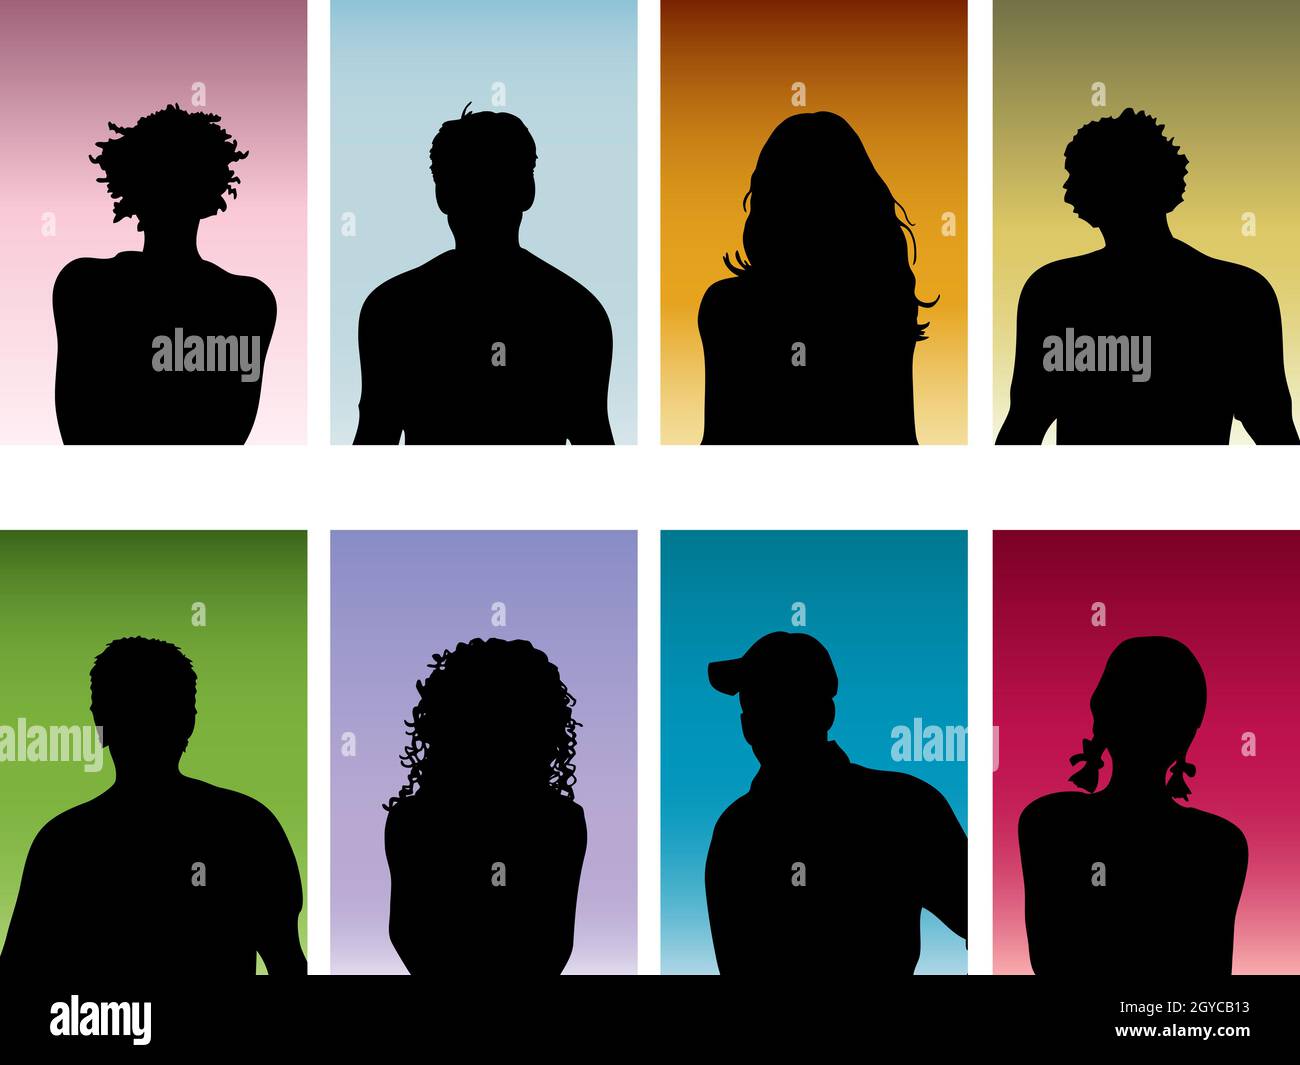 Silhouettes of peoples heads Stock Photo